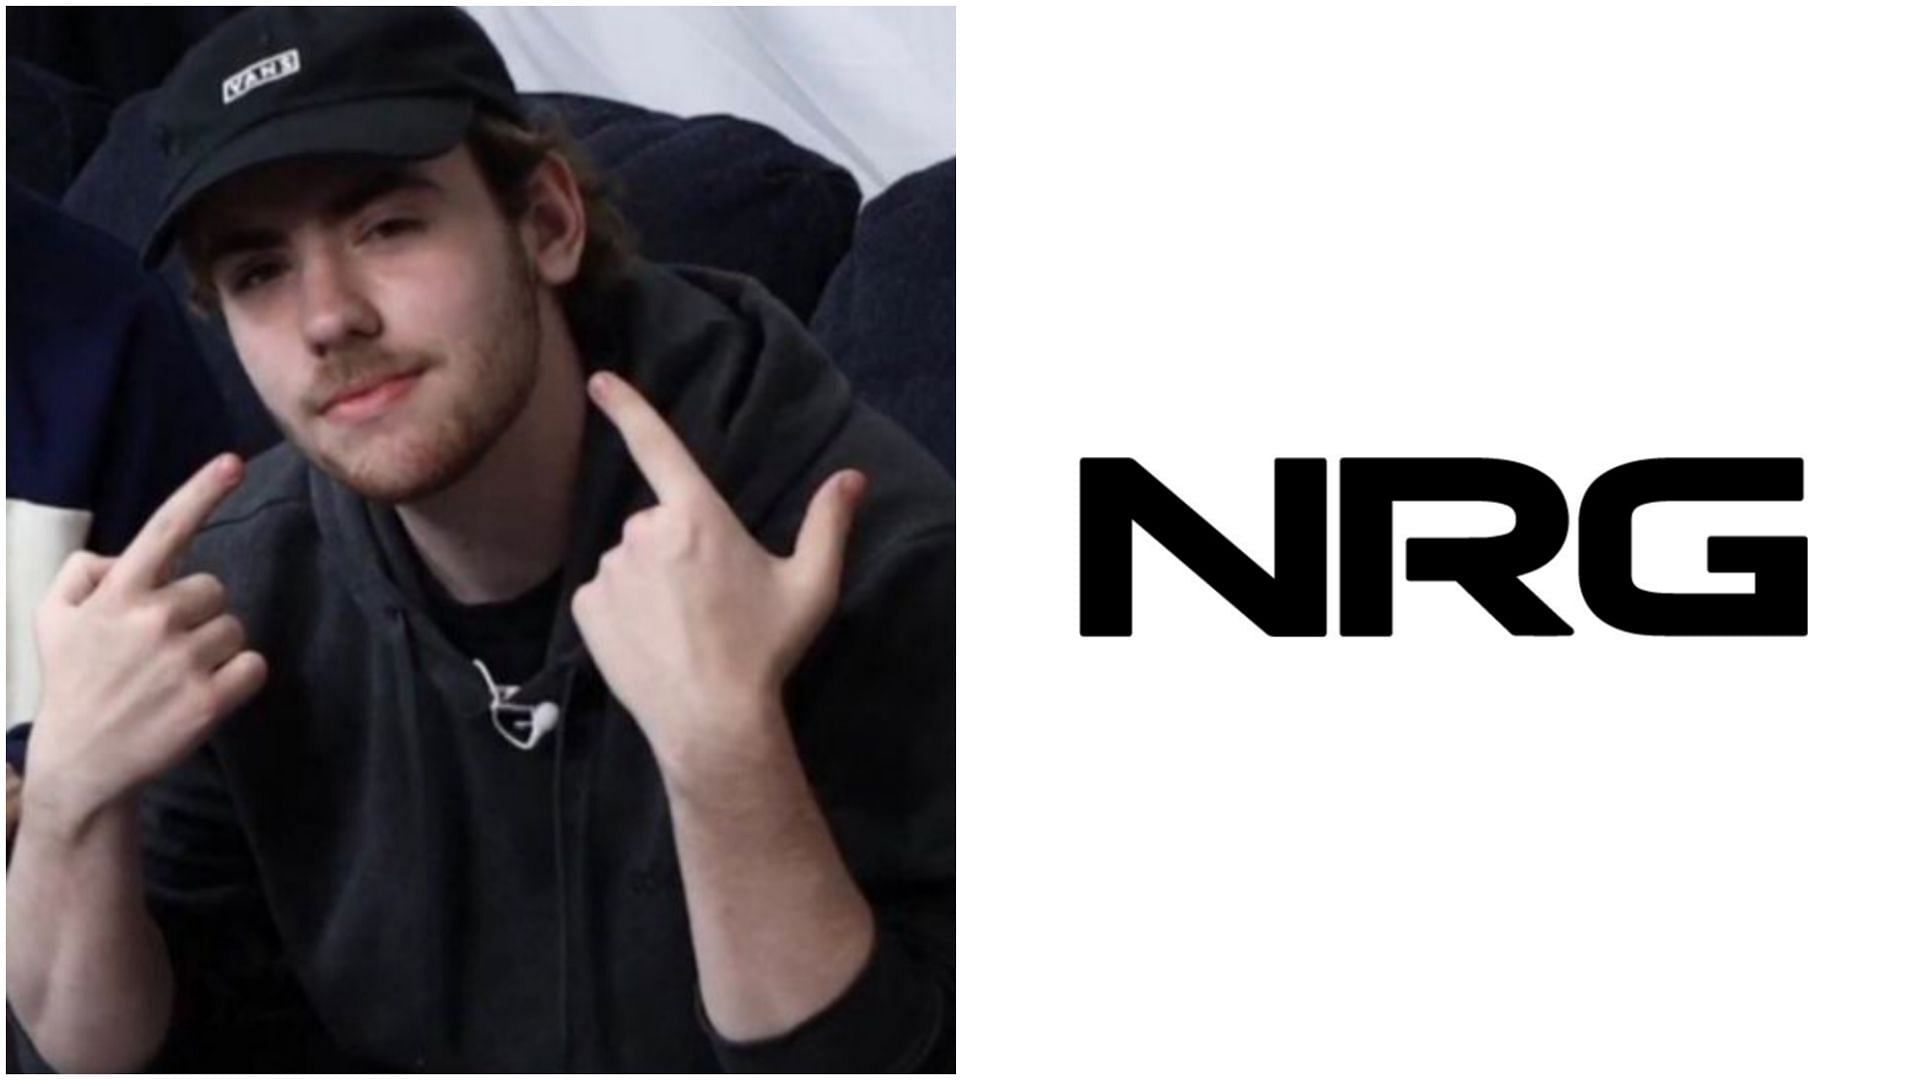 Popular Minecraft YouTuber Sapnap has officially signed on with NRG Esports as a co-owner (Images via Twitter)